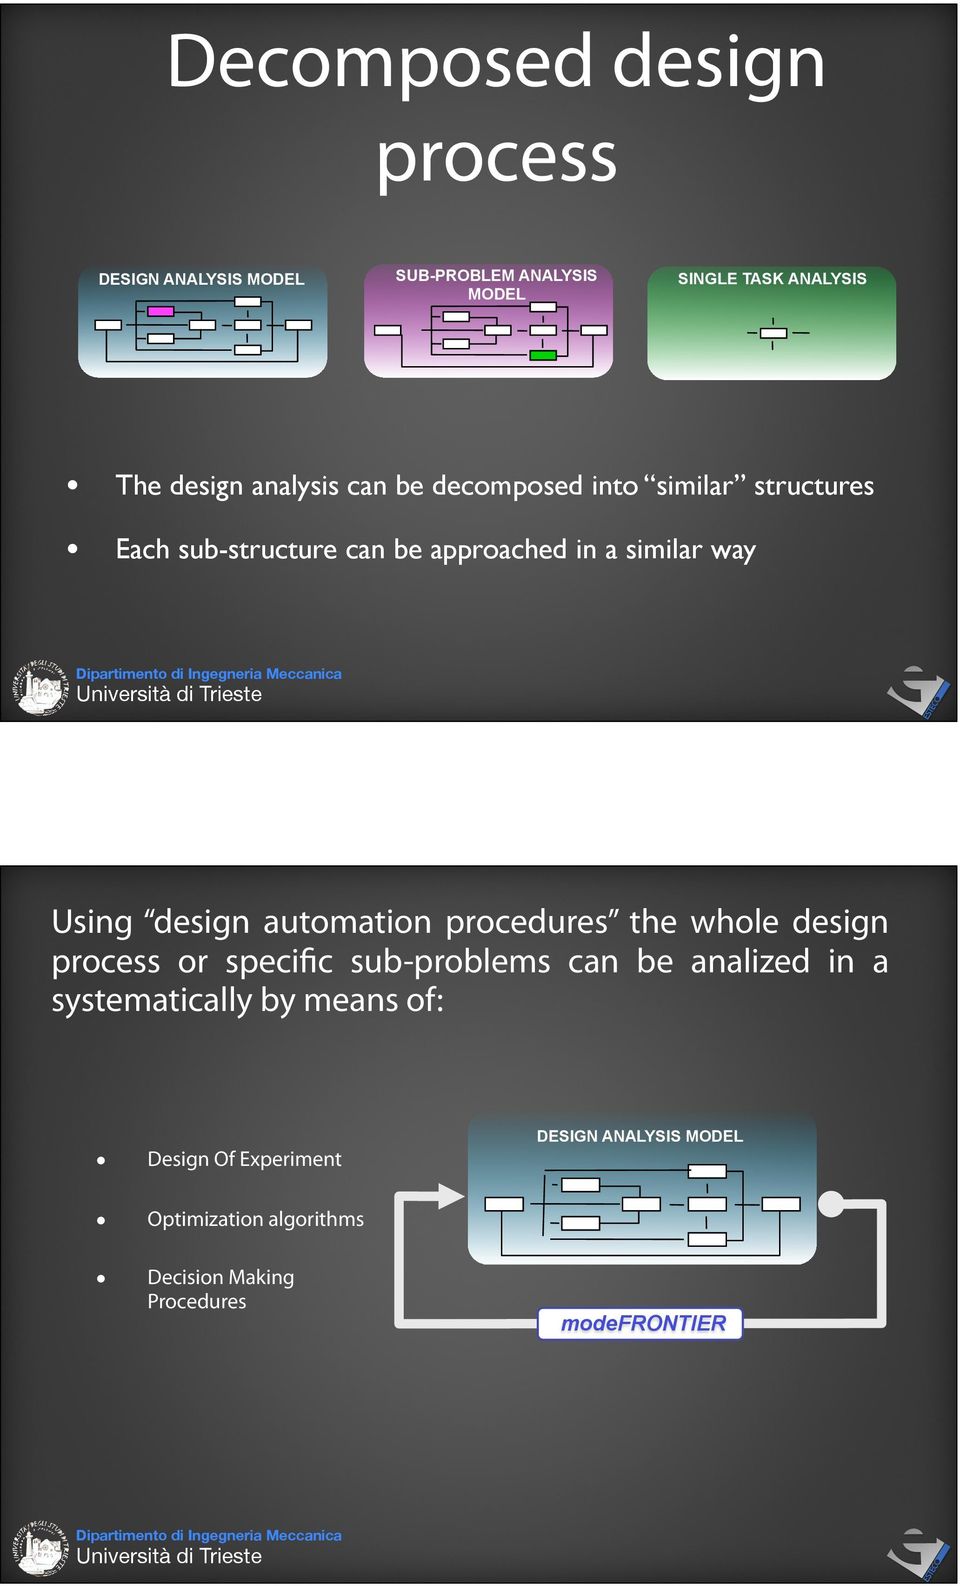 design automation procedures the whole design process or specific sub-problems can be analized in a